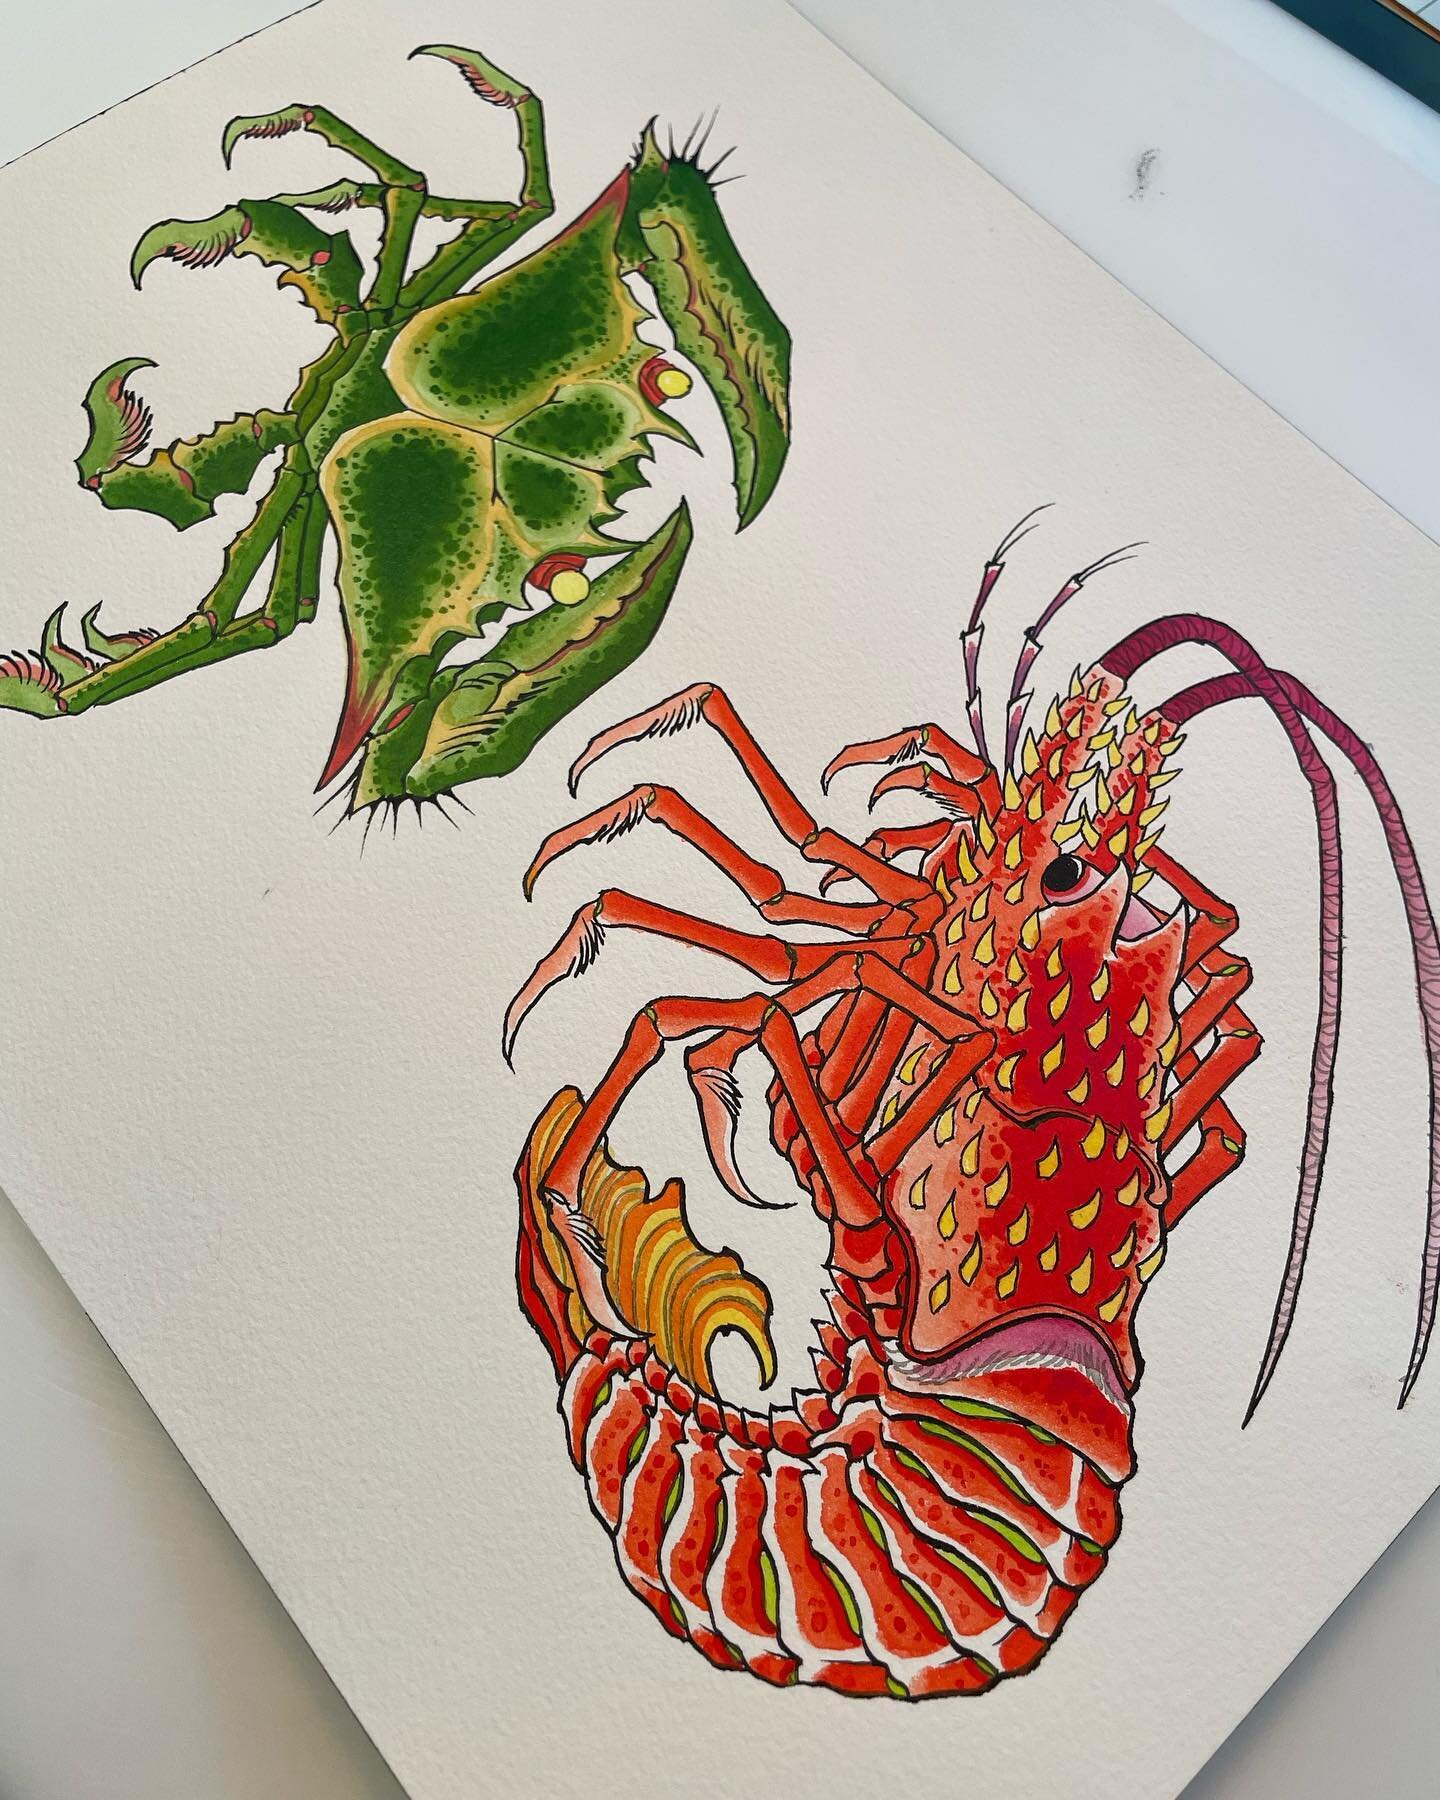 Crustaceans 🦀🦞 Hokusai study knocking the dust off the paint brushes. Available to be tattooed

🎲🍒@hotlinetattoo🍒🎲
***************************